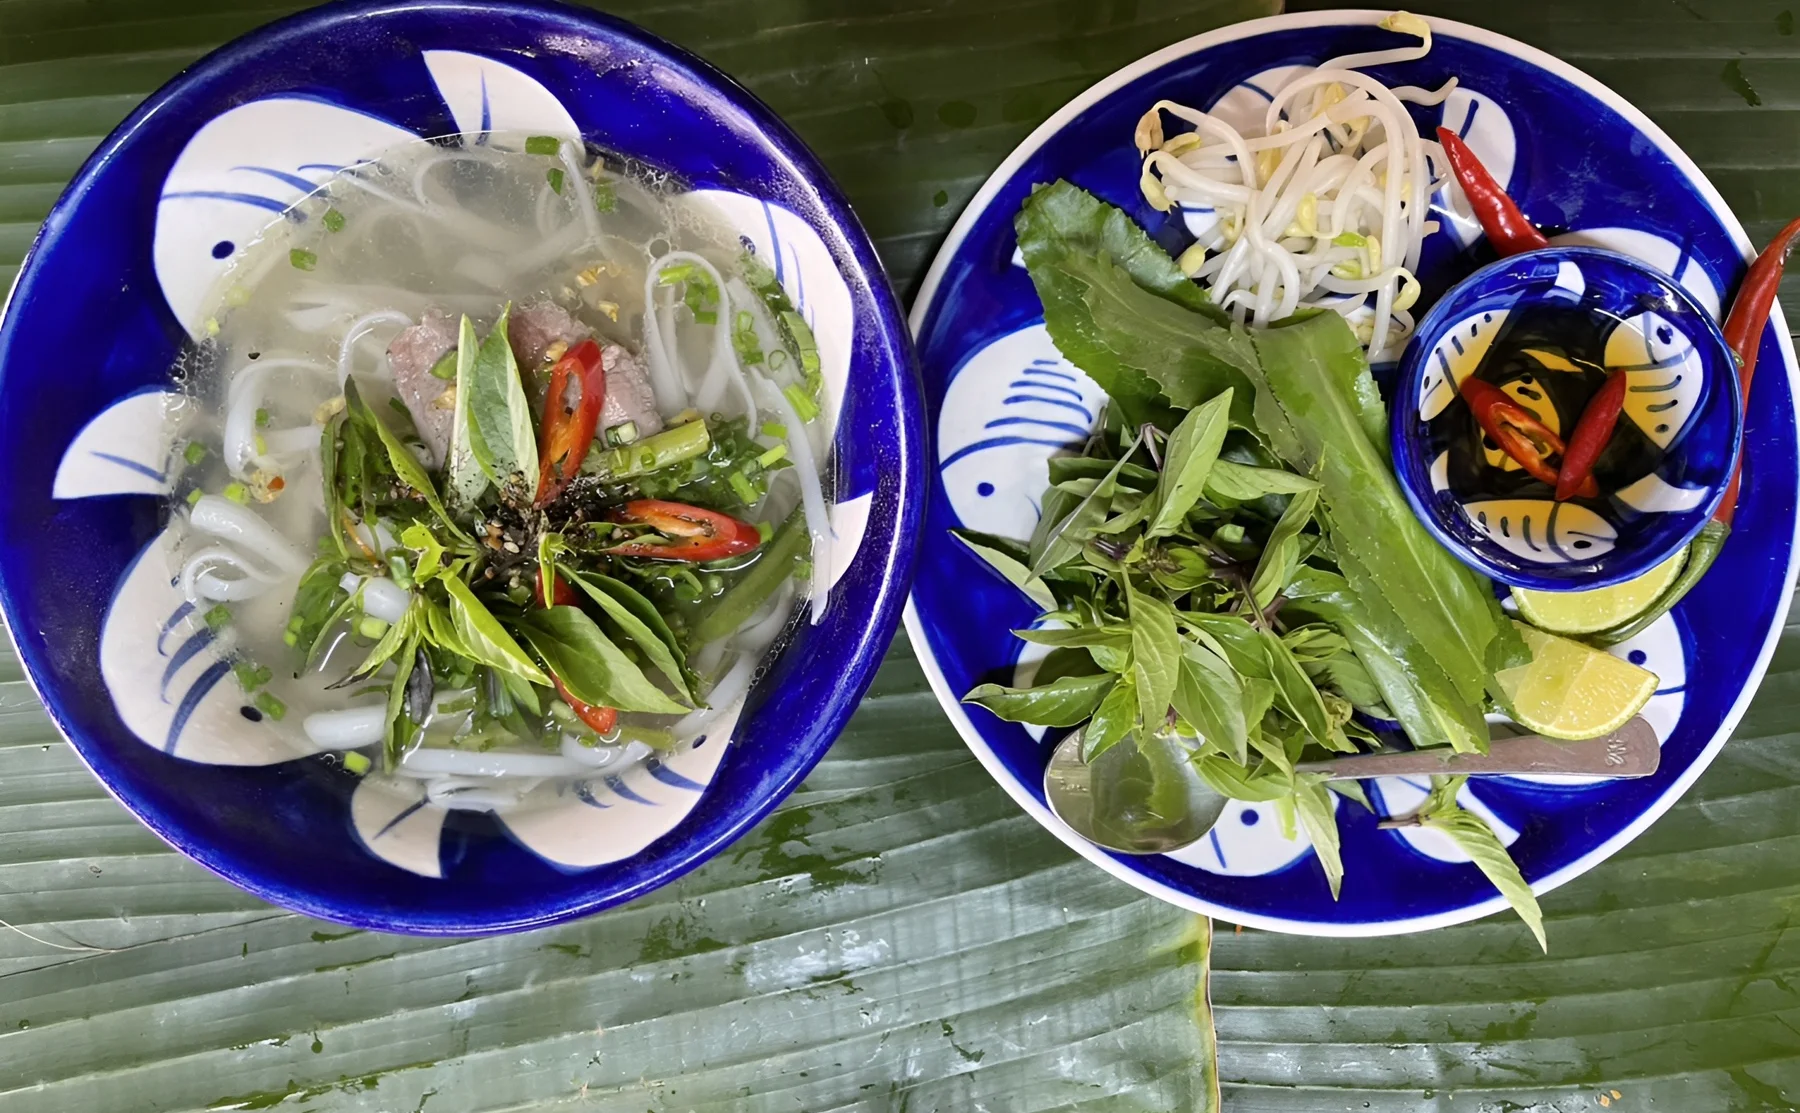 Hoi An Market tour, Basket boat and Cooking Class in the Afternoon - 1478122